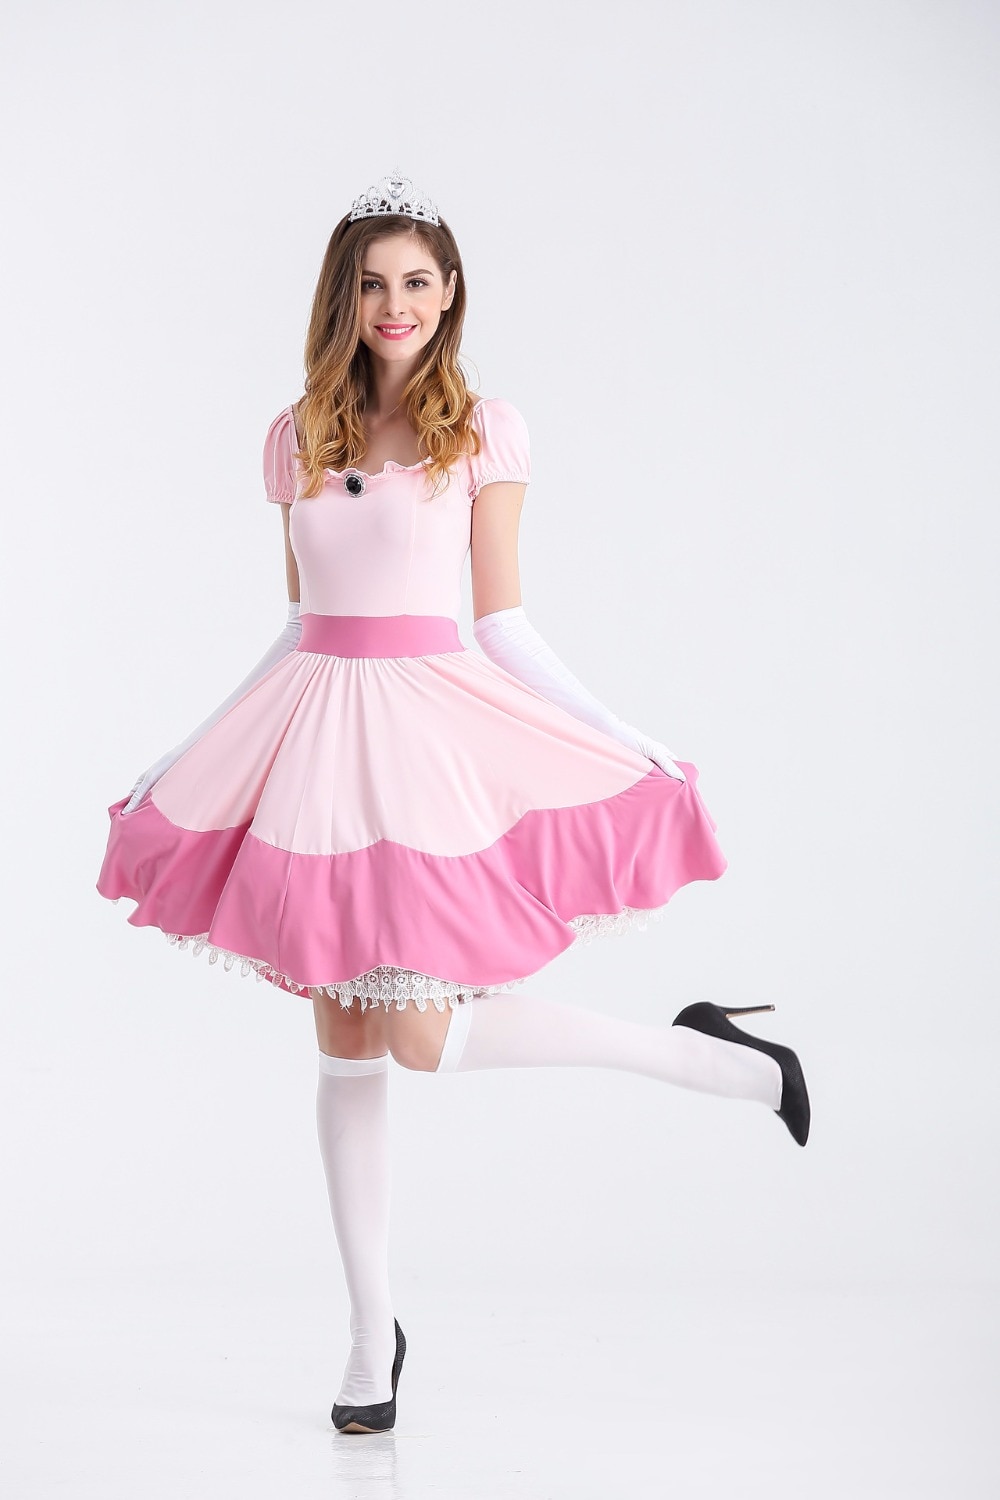 Halloween Pink Peach Princess Super Mario Costume Women For Adults Women Girl Super Mario Bros Cosplay Party Dress Sexy Cosplay